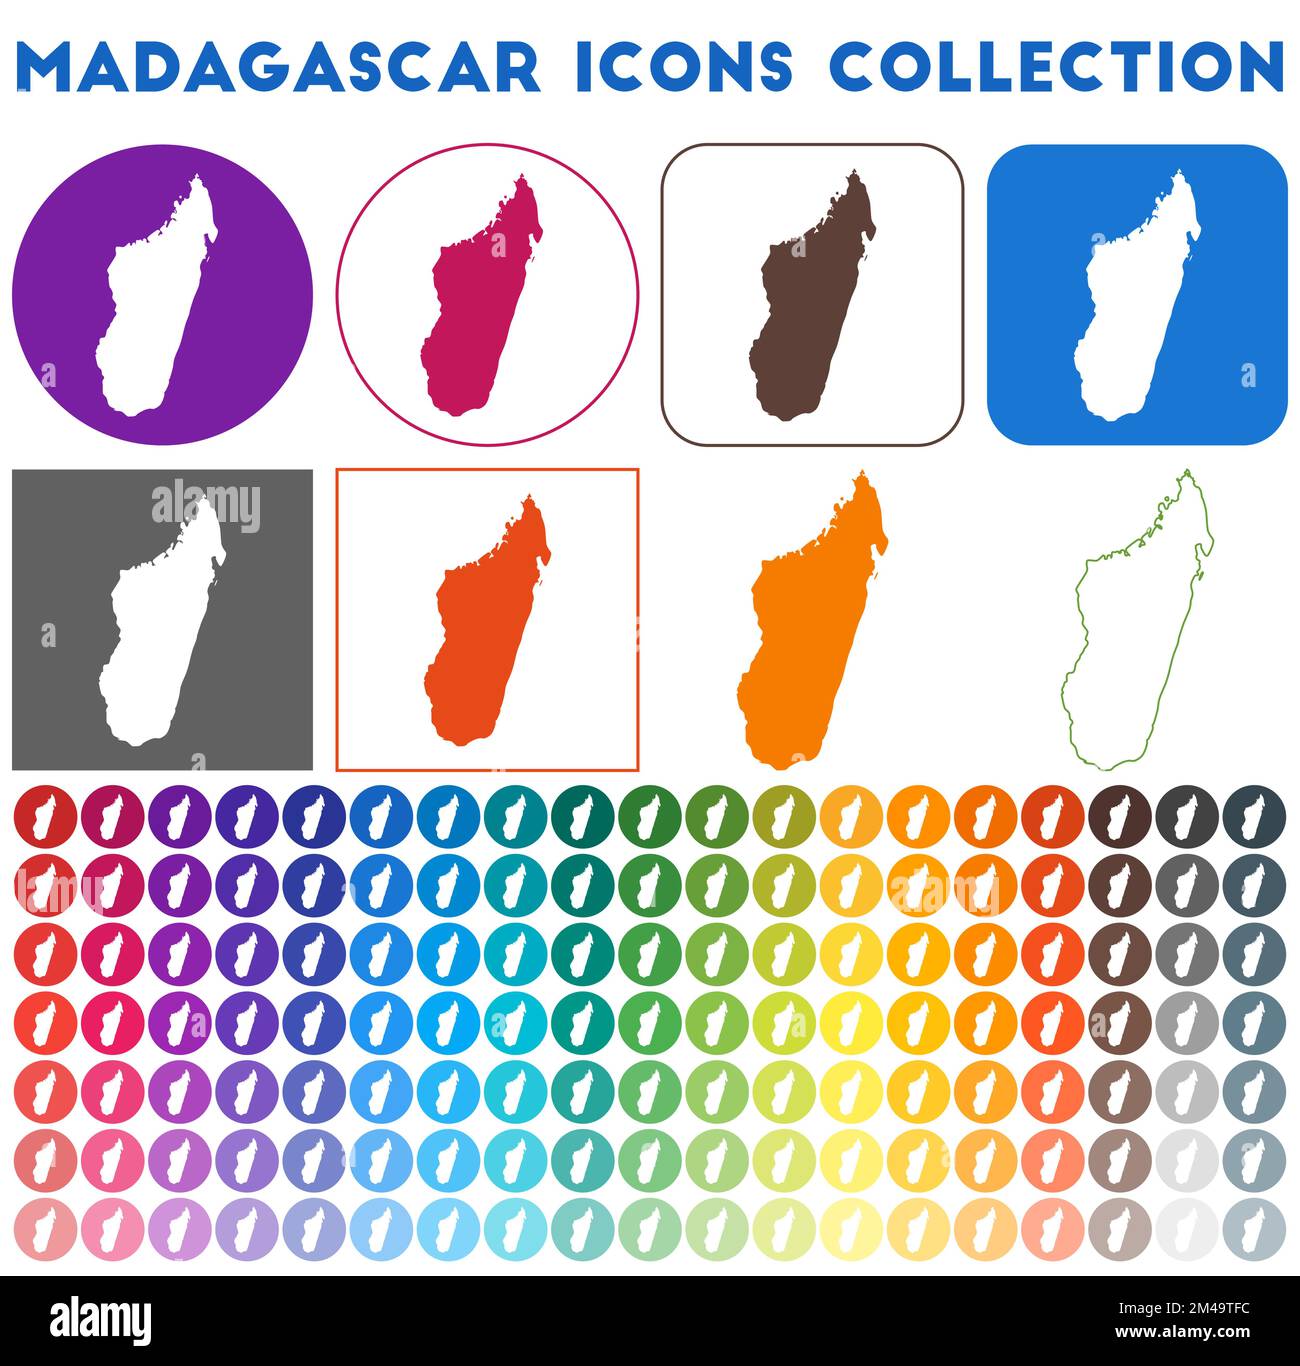 Madagascar icons collection. Bright colourful trendy map icons. Modern Madagascar badge with country map. Vector illustration. Stock Vector